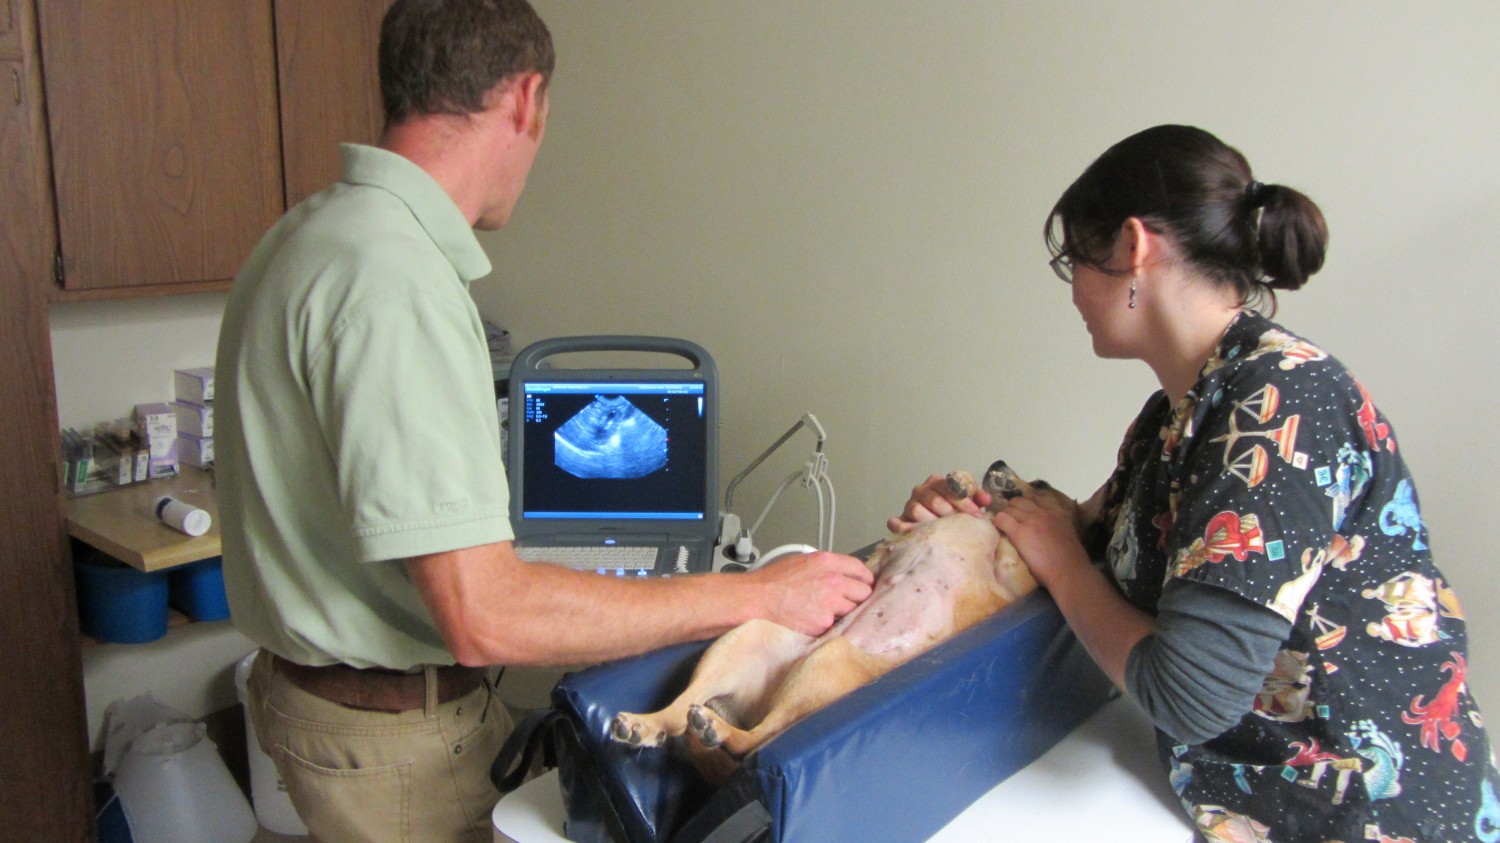 Dr. Luebbe performs a complete abdominal ultrasound.